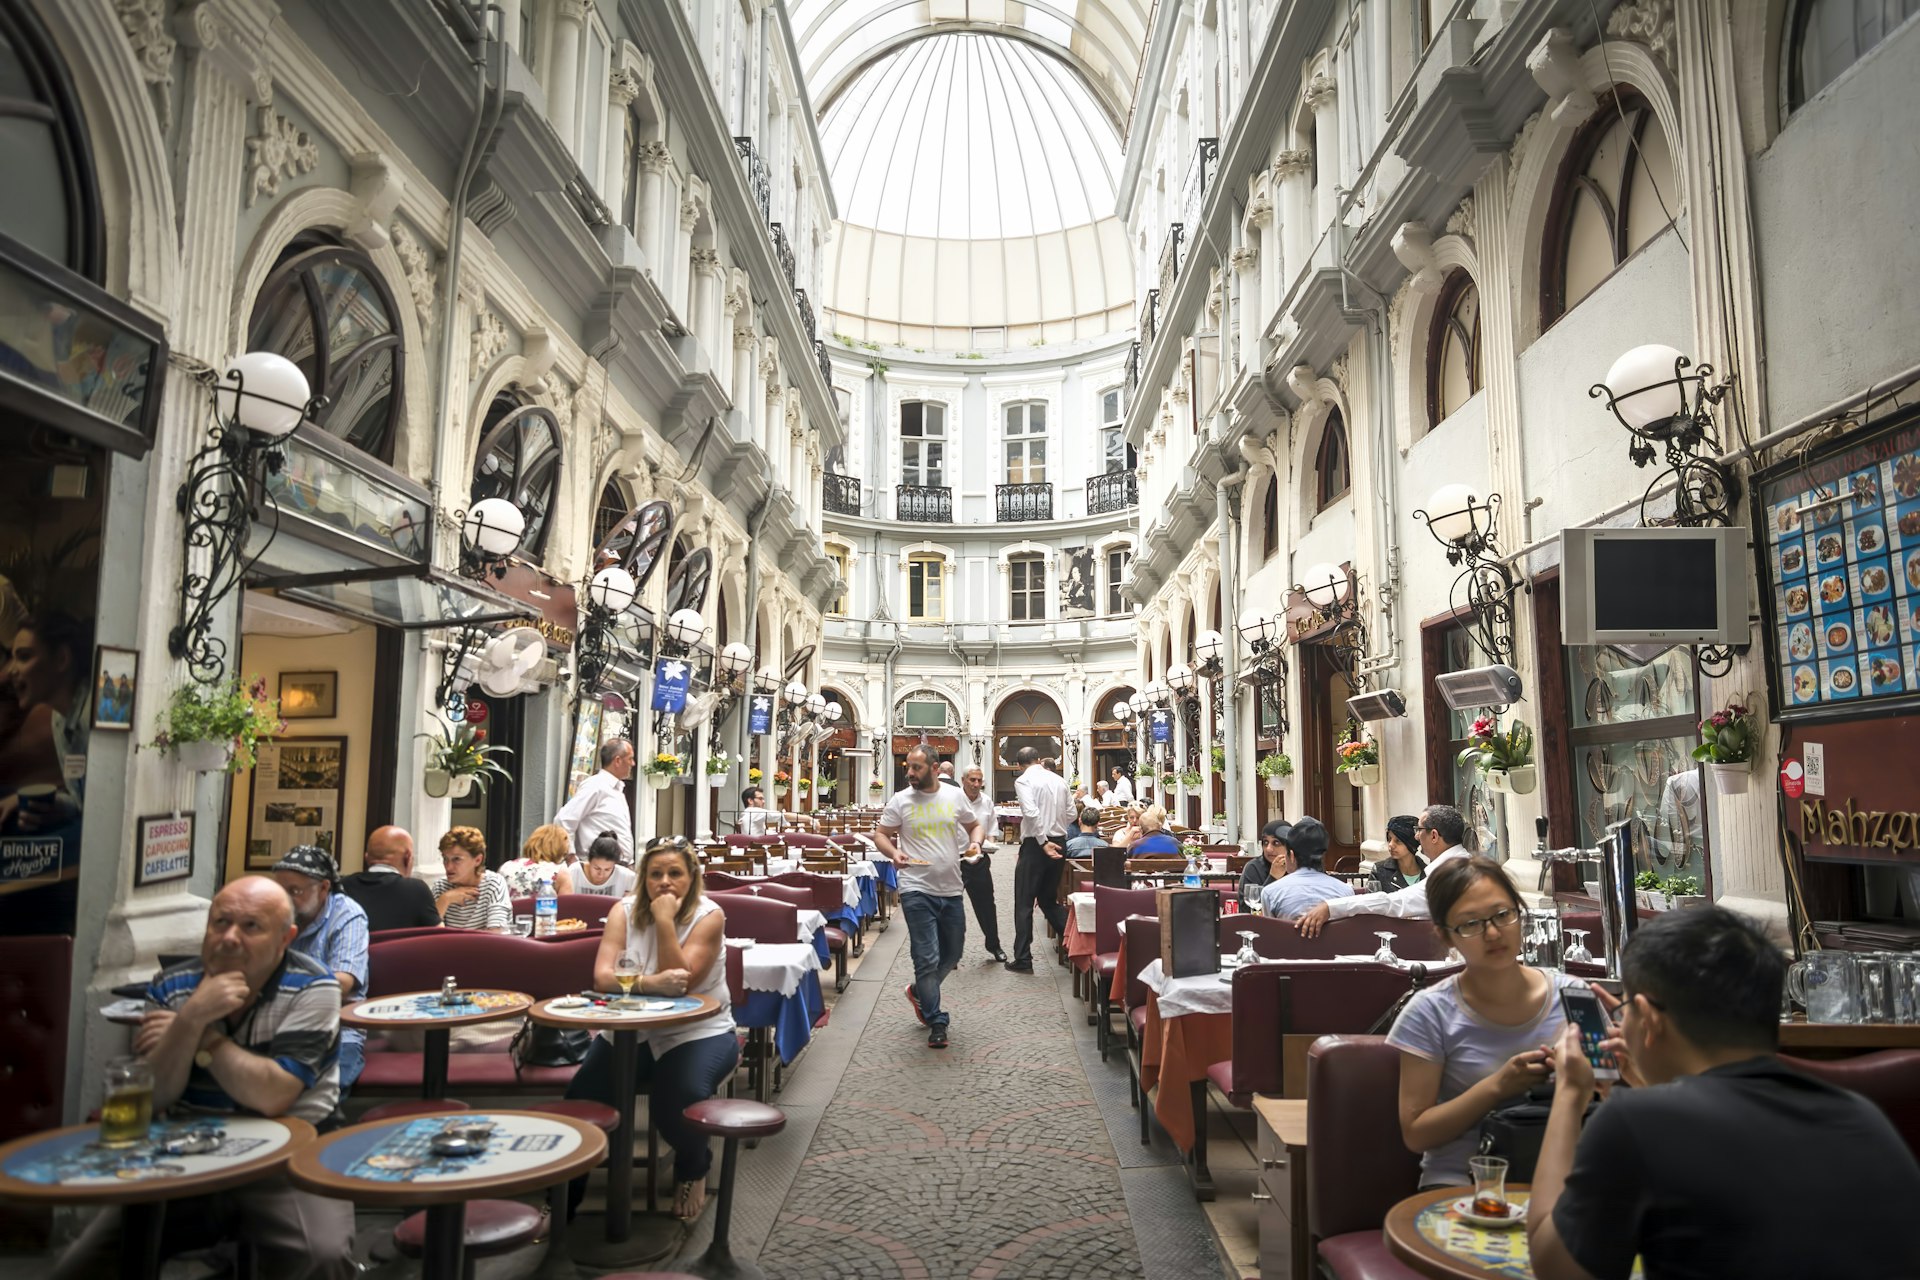 Many people are sitting at the tables of the cafes which line an arcade in Istanbul; the facades are ornately decorated with carvings and lamps.